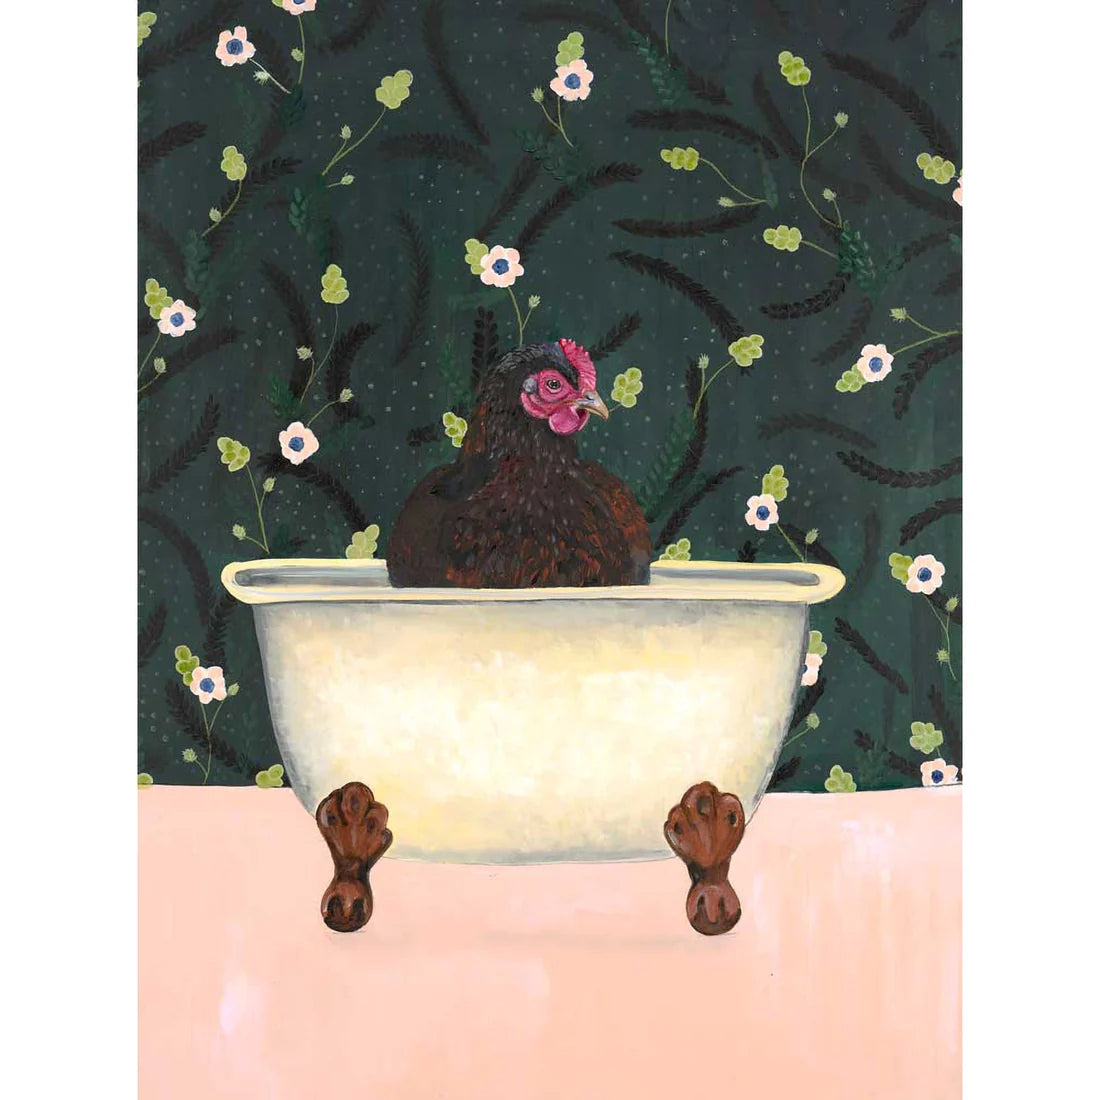 Roost In Tub Canvas Wall Art